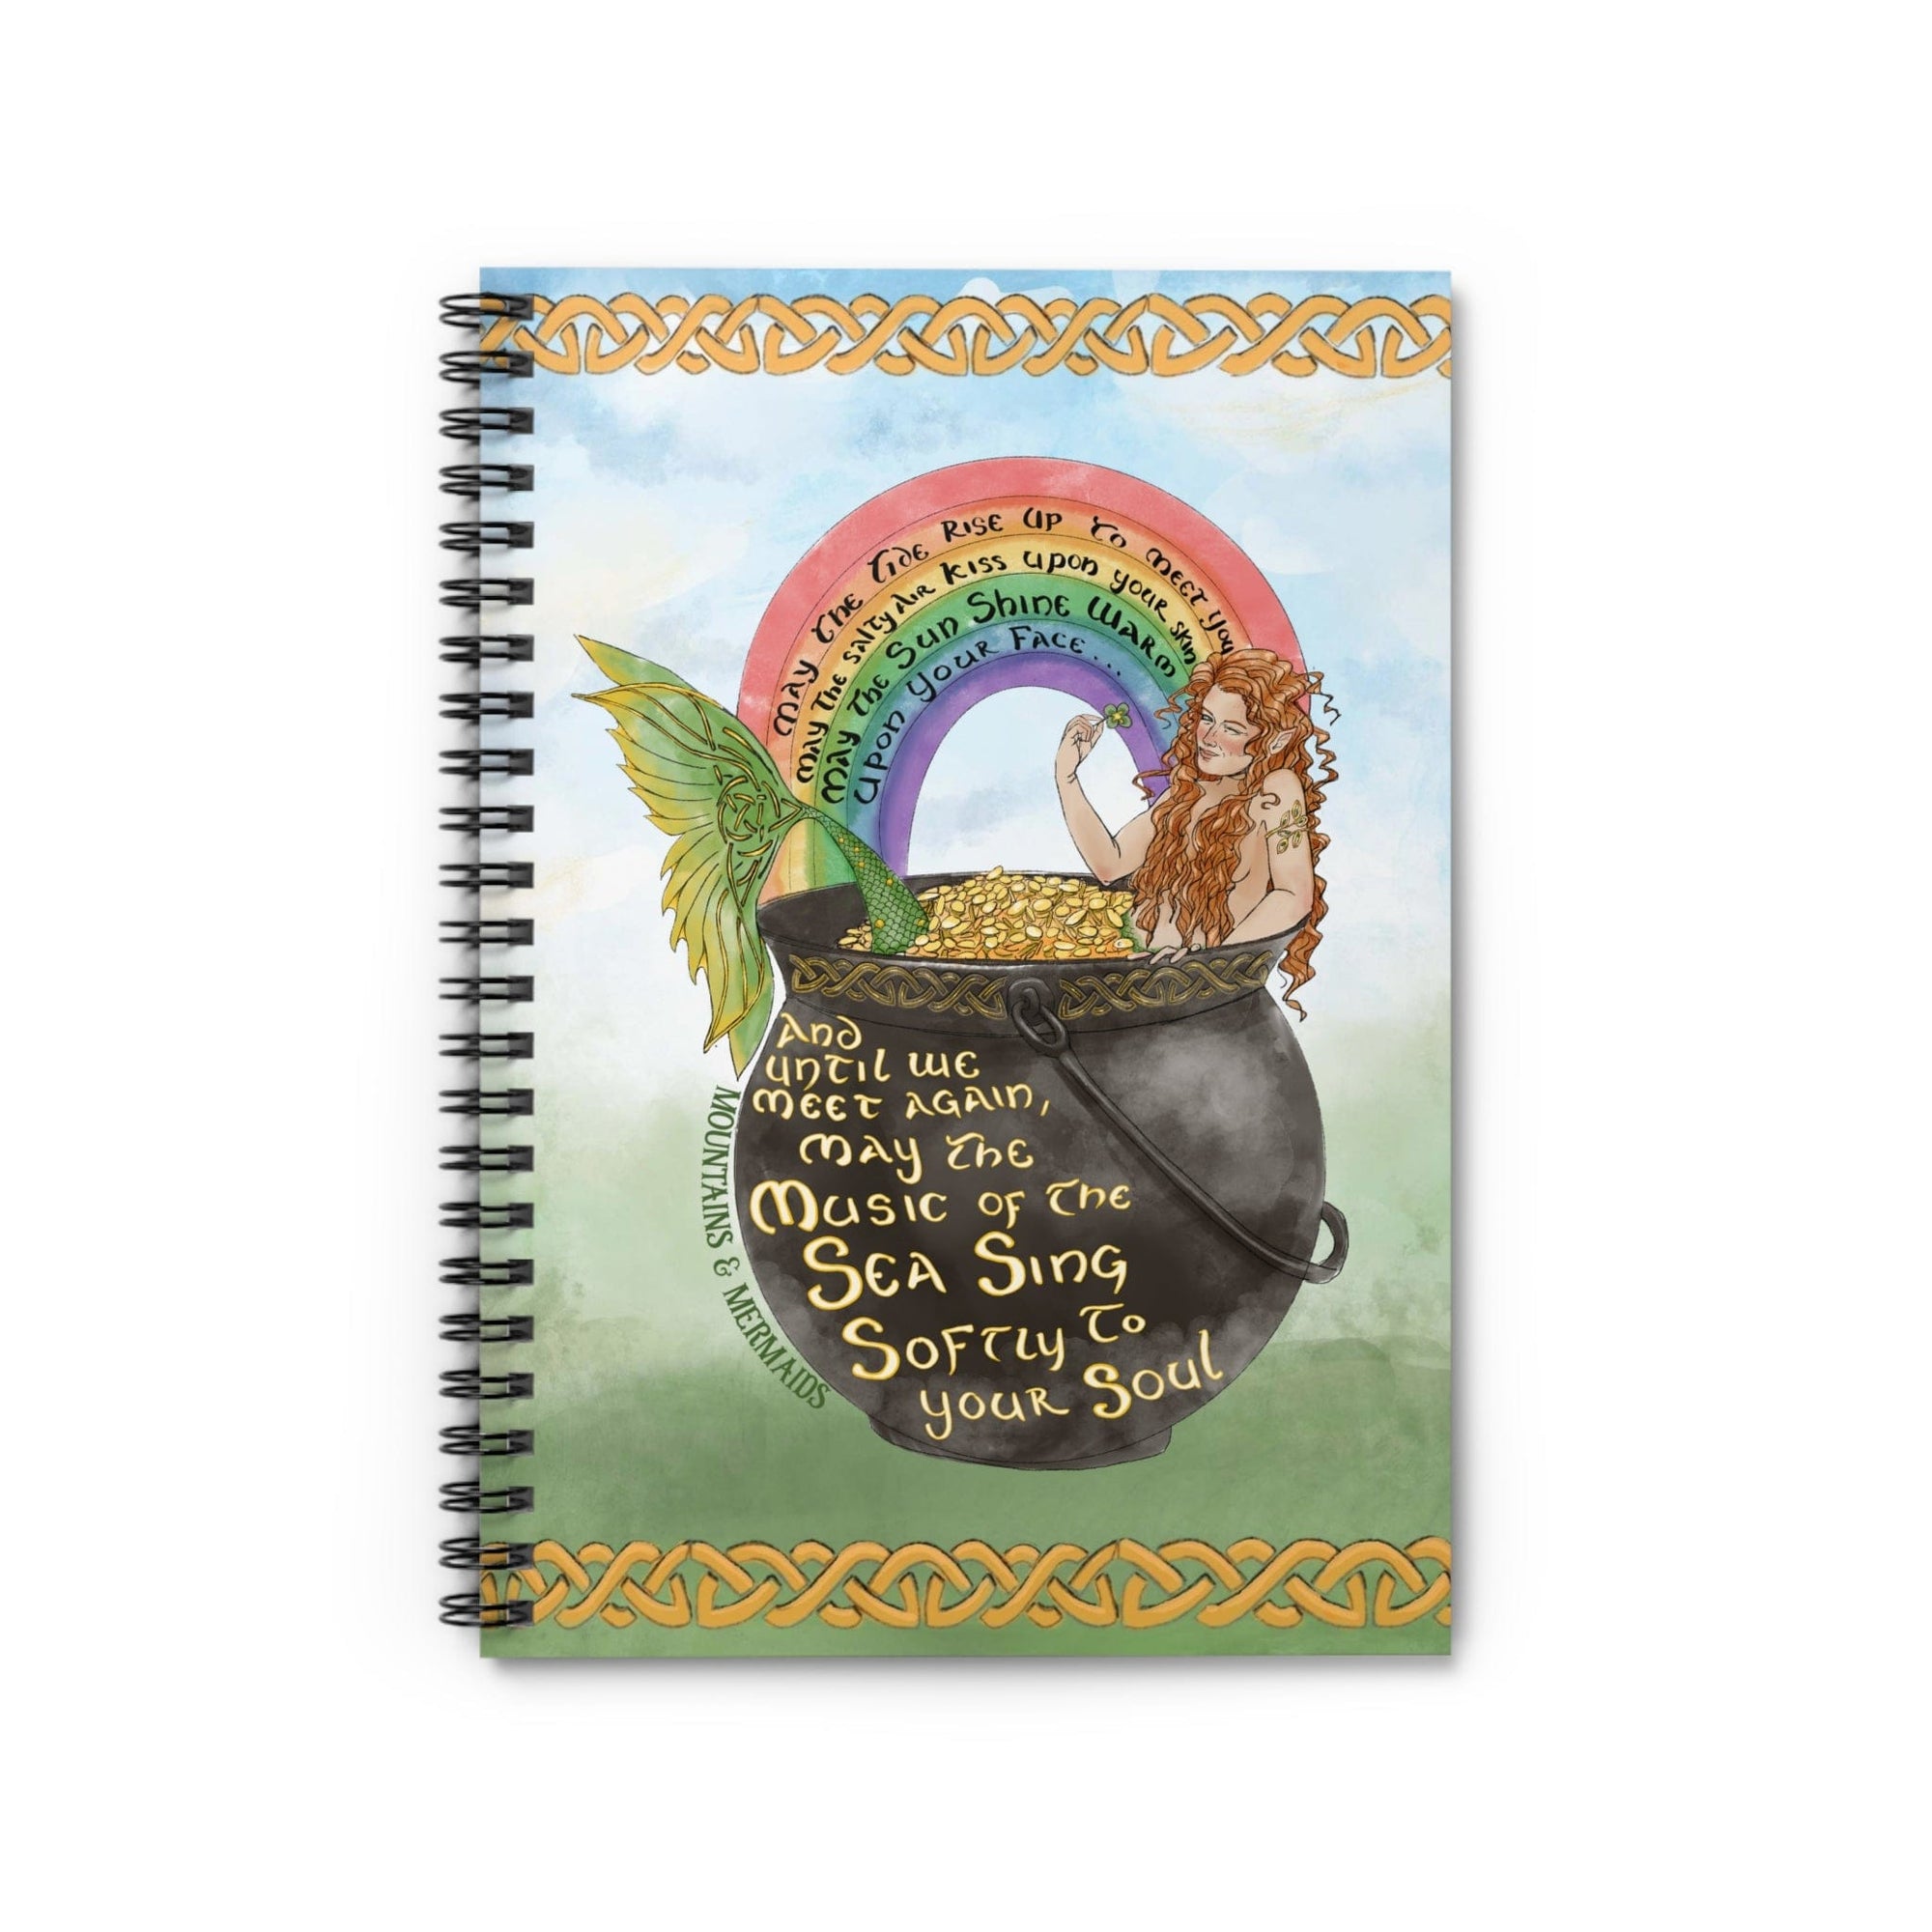 Celtic Knot Mermaid Spiral Notebook - Ruled Line - Mountains & Mermaids